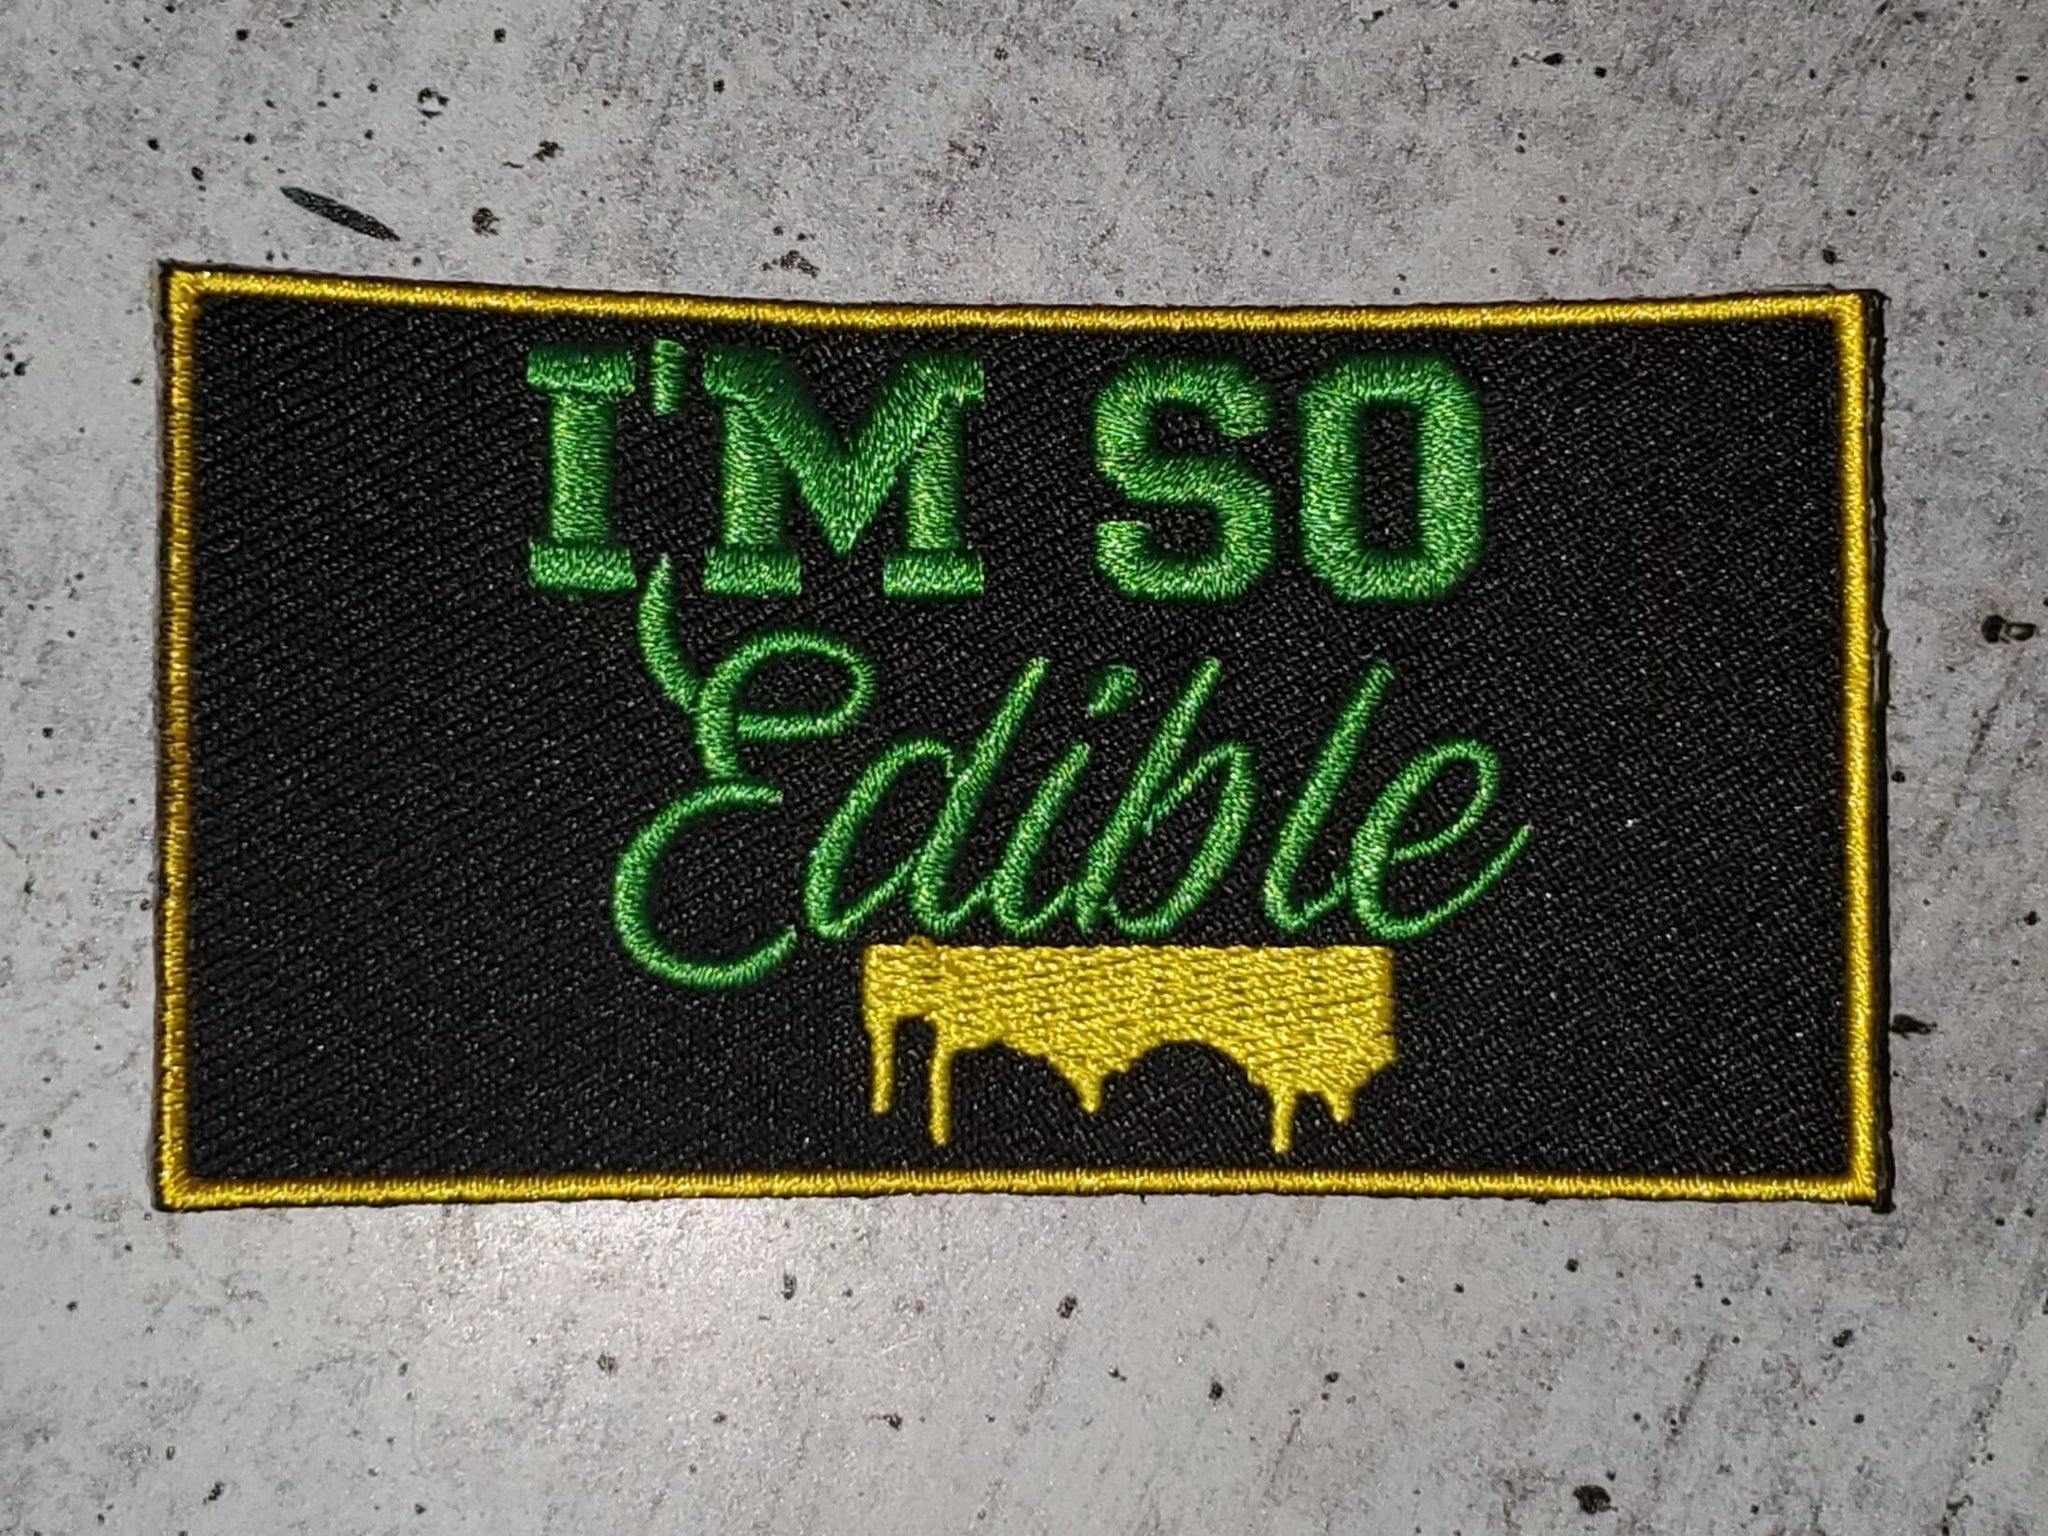 NEW, Limited Edition, "I'm So Edible" Iron-On Patch, Embroidered Patch Grab Bag, Patches for Weed Lovers, Cannabis Badge,Size 3"